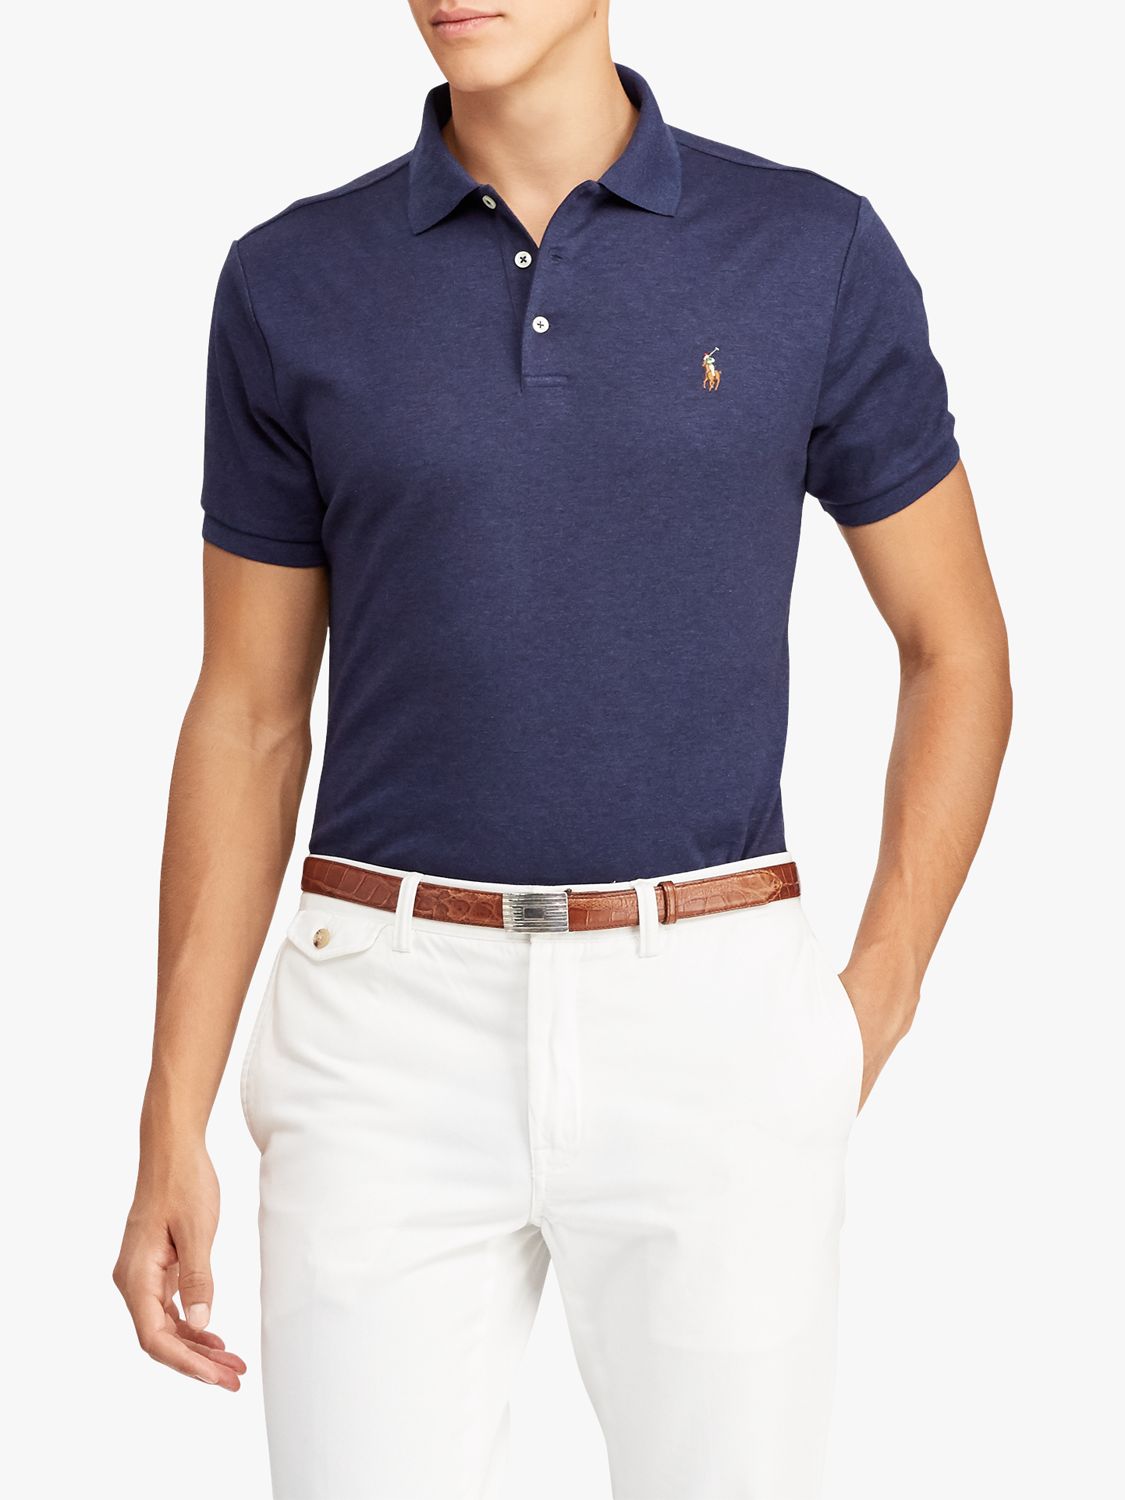 Polo Ralph Lauren Slim Fit Soft Touch Polo Shirt, Spring Navy Heather ...